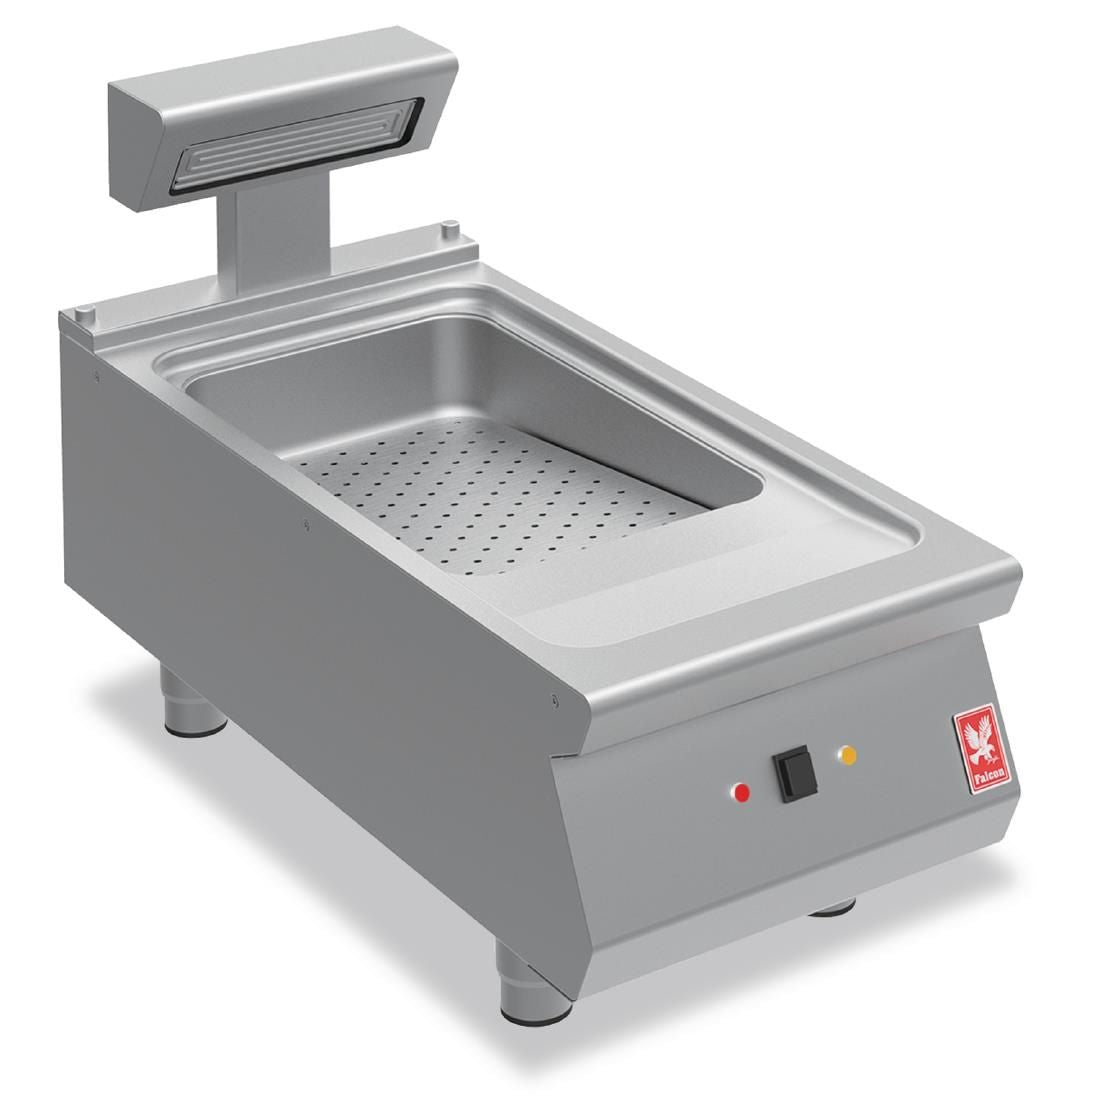 Falcon F900 Chip Scuttle Electric E9646 JD Catering Equipment Solutions Ltd